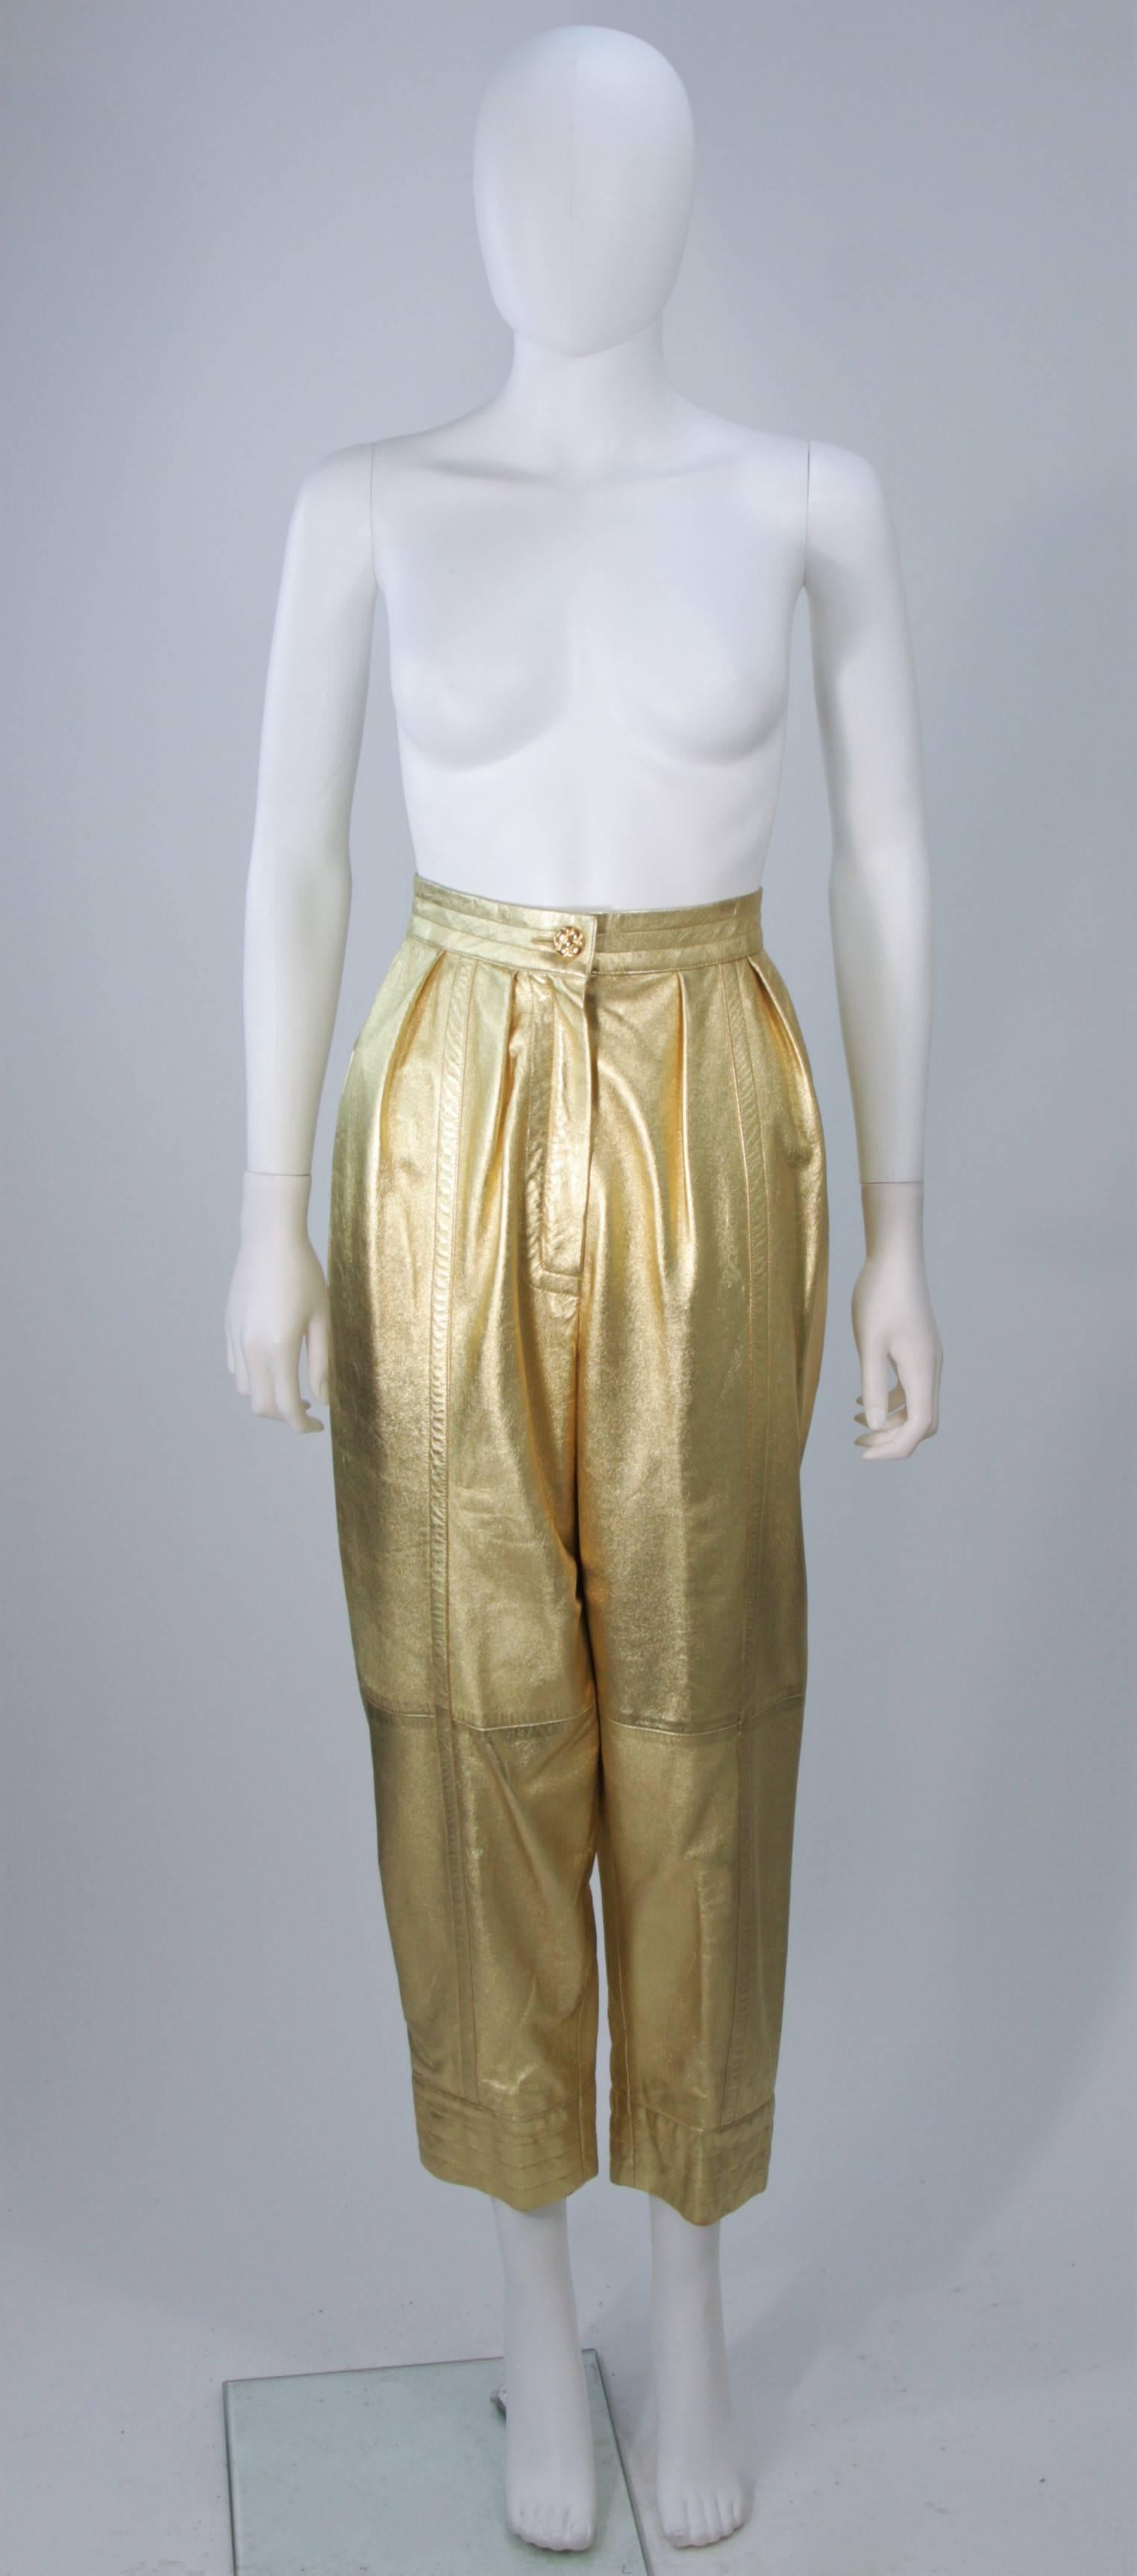  This Yves Saint Laurent pants are composed of a gold metallic leather. Features a center front zipper, side pocket, and pleated front. In excellent vintage condition.

**Please cross-reference measurements for personal accuracy.

Measures